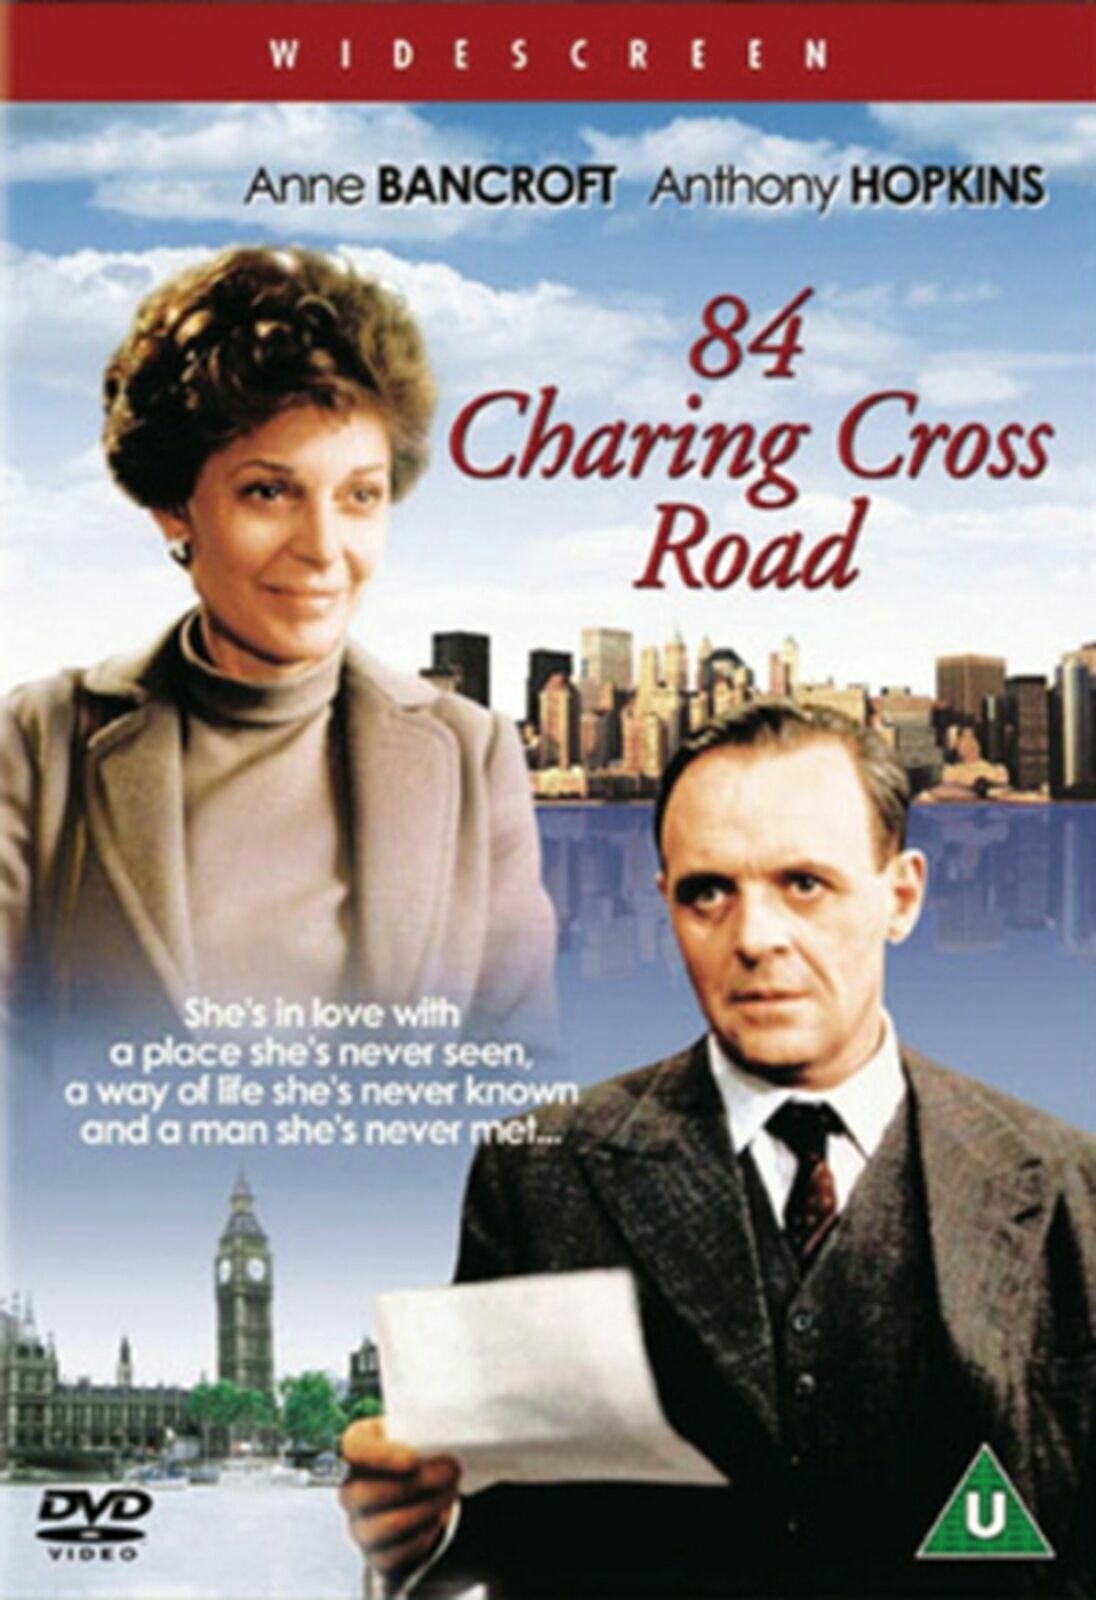 84 Charing Cross Road [DVD] (1986) Anthony Hopkins Anne Bancroft - Picture 1 of 1